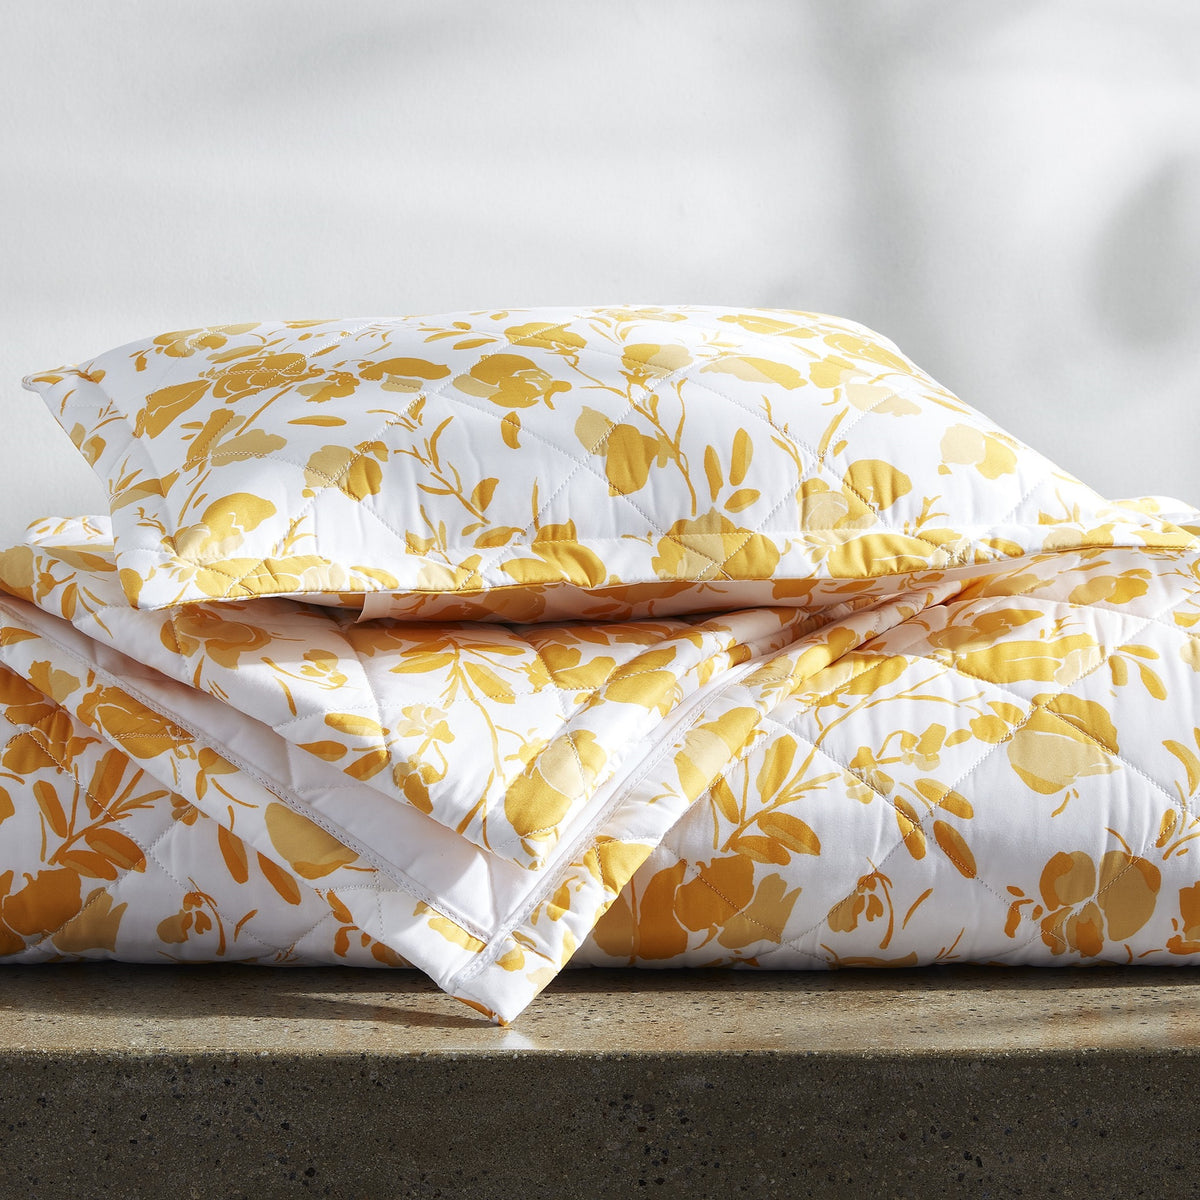 Folded Stack of Quilted Matouk Alexandra Bedding in Goldenrod Color